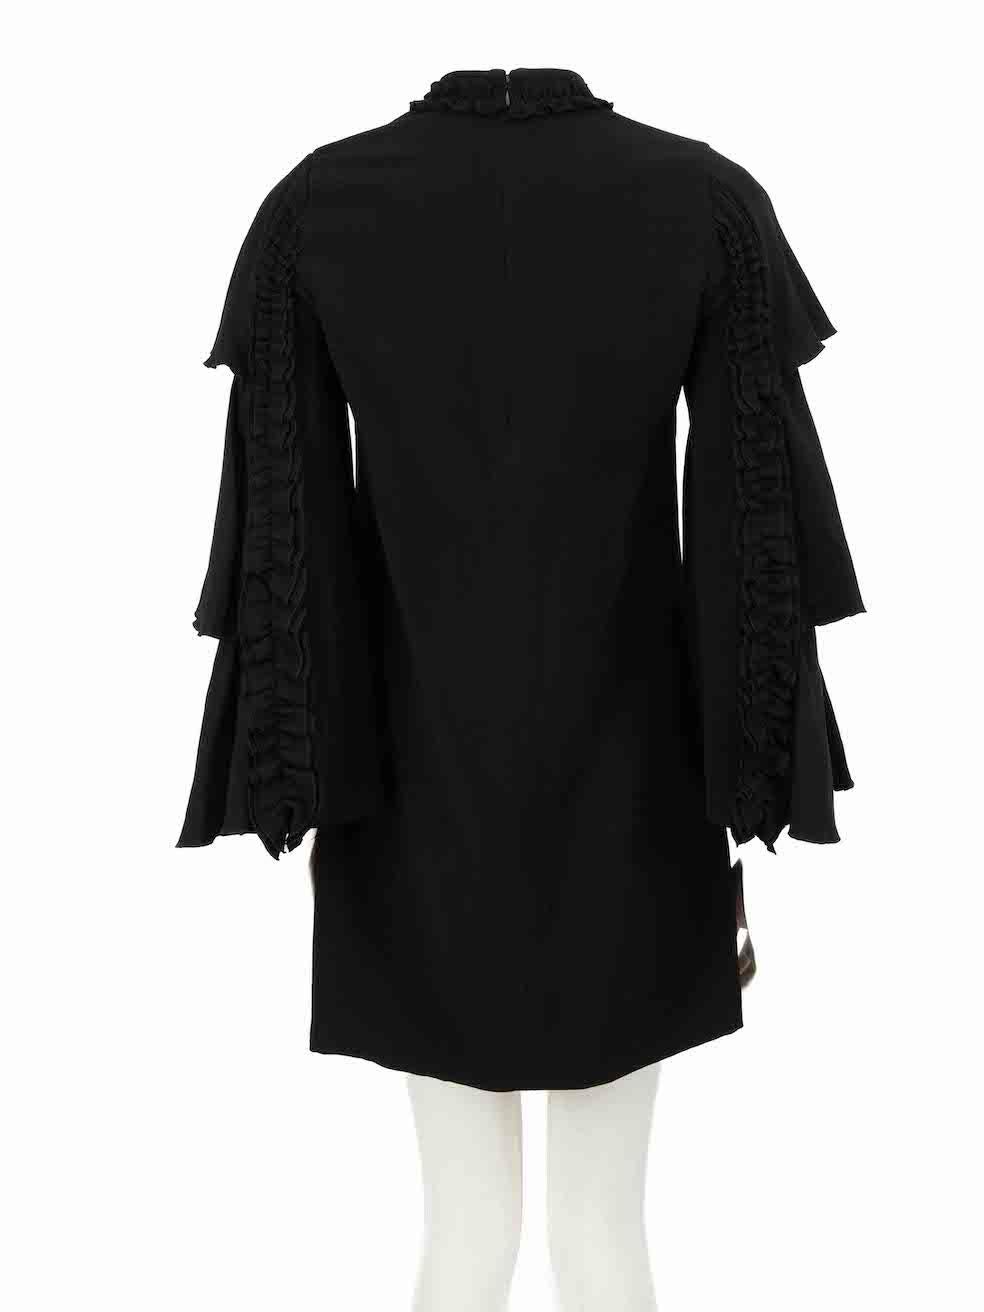 Alexis Black Ruffle Trim Long Sleeves Mini Dress Size S In Excellent Condition For Sale In London, GB